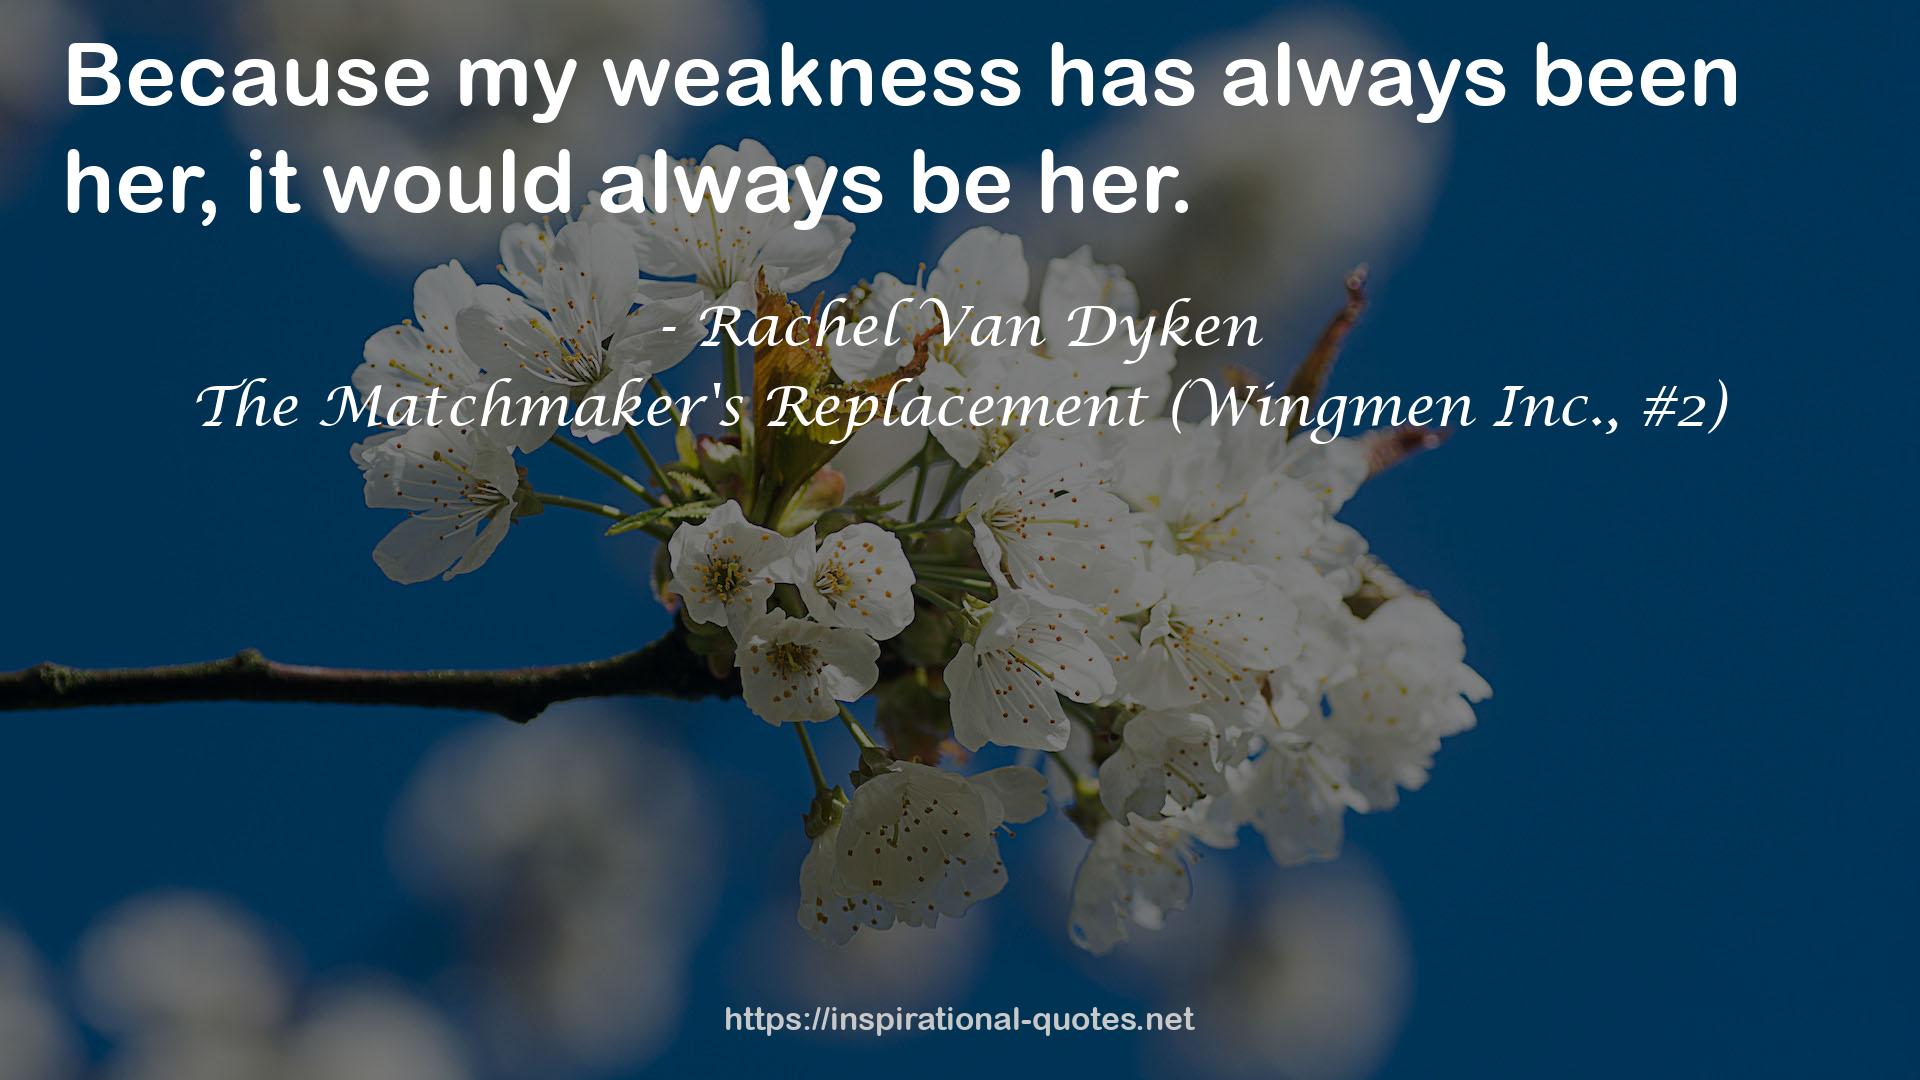 The Matchmaker's Replacement (Wingmen Inc., #2) QUOTES